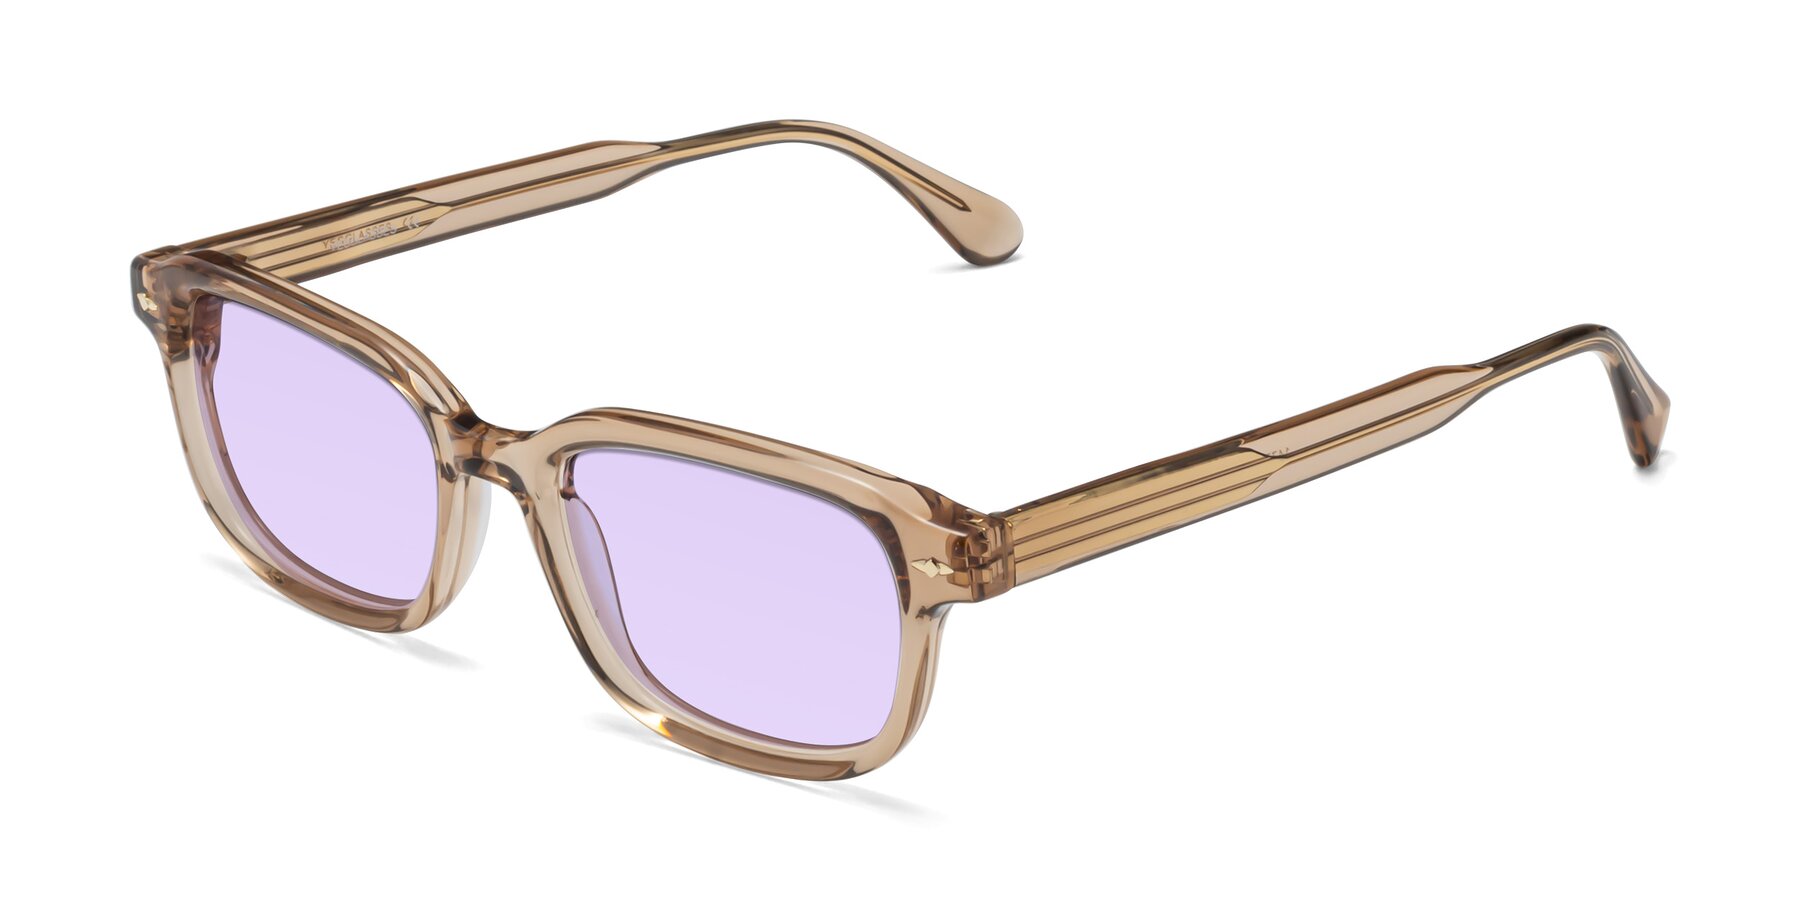 Angle of 1477 in Caramel with Light Purple Tinted Lenses